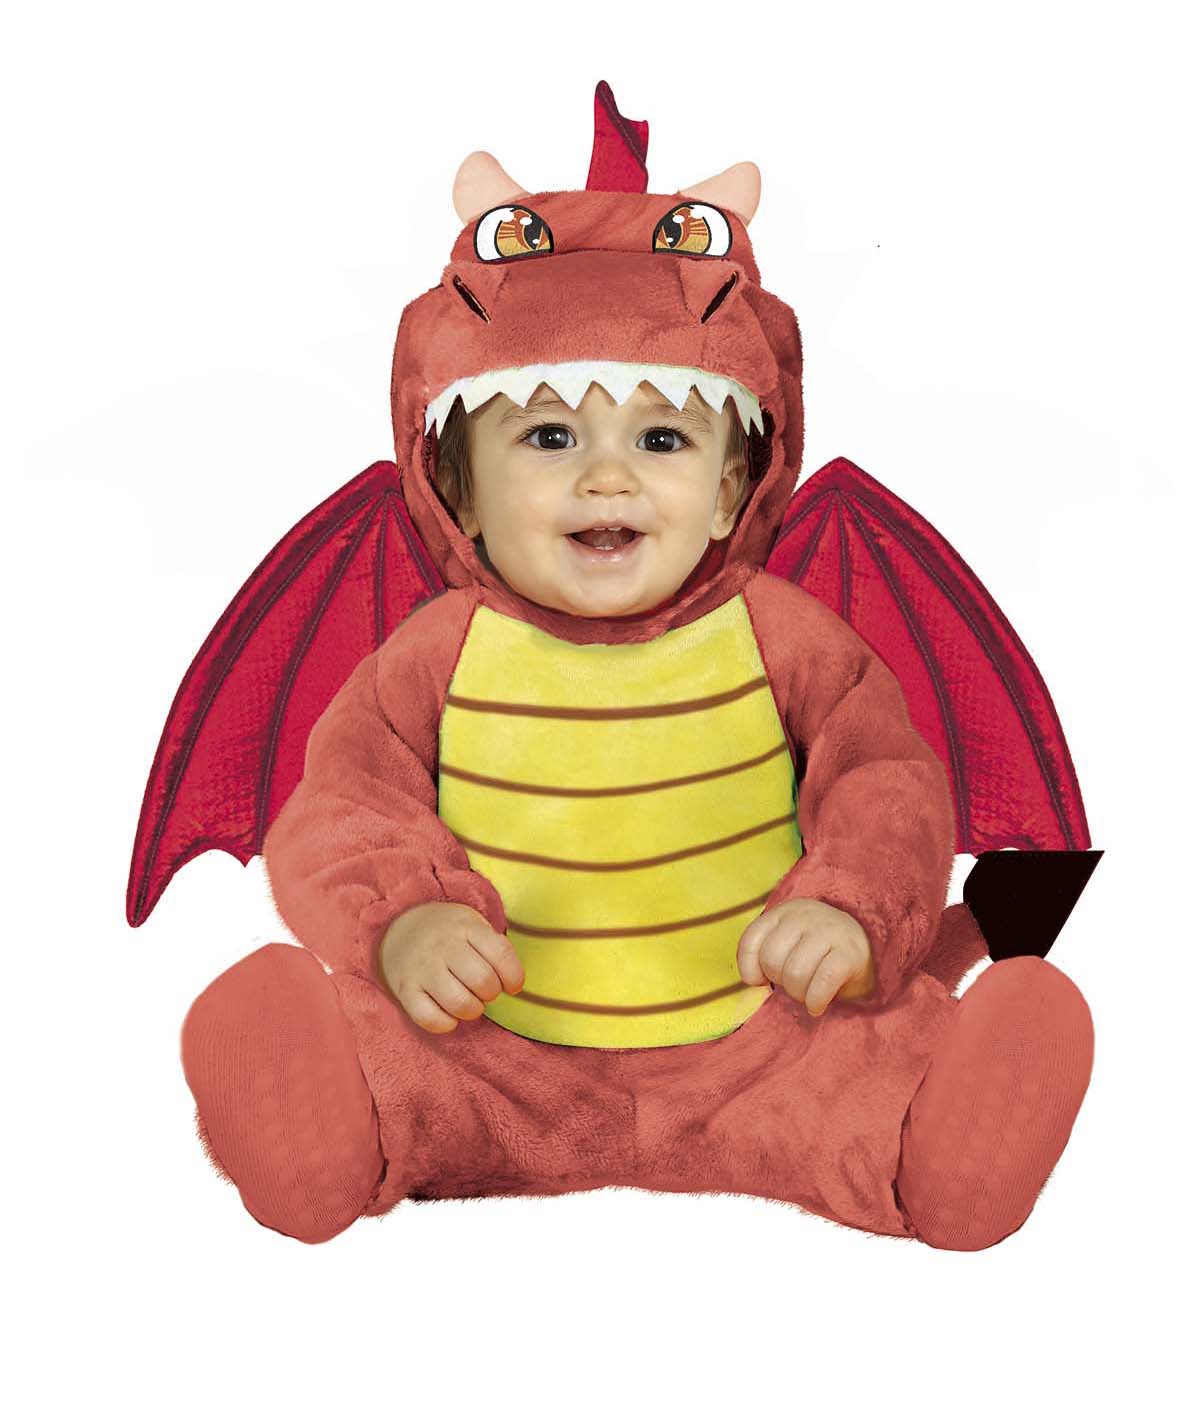 Baby Red Dragon Costume includes jumpsuit with wings and tail and hood